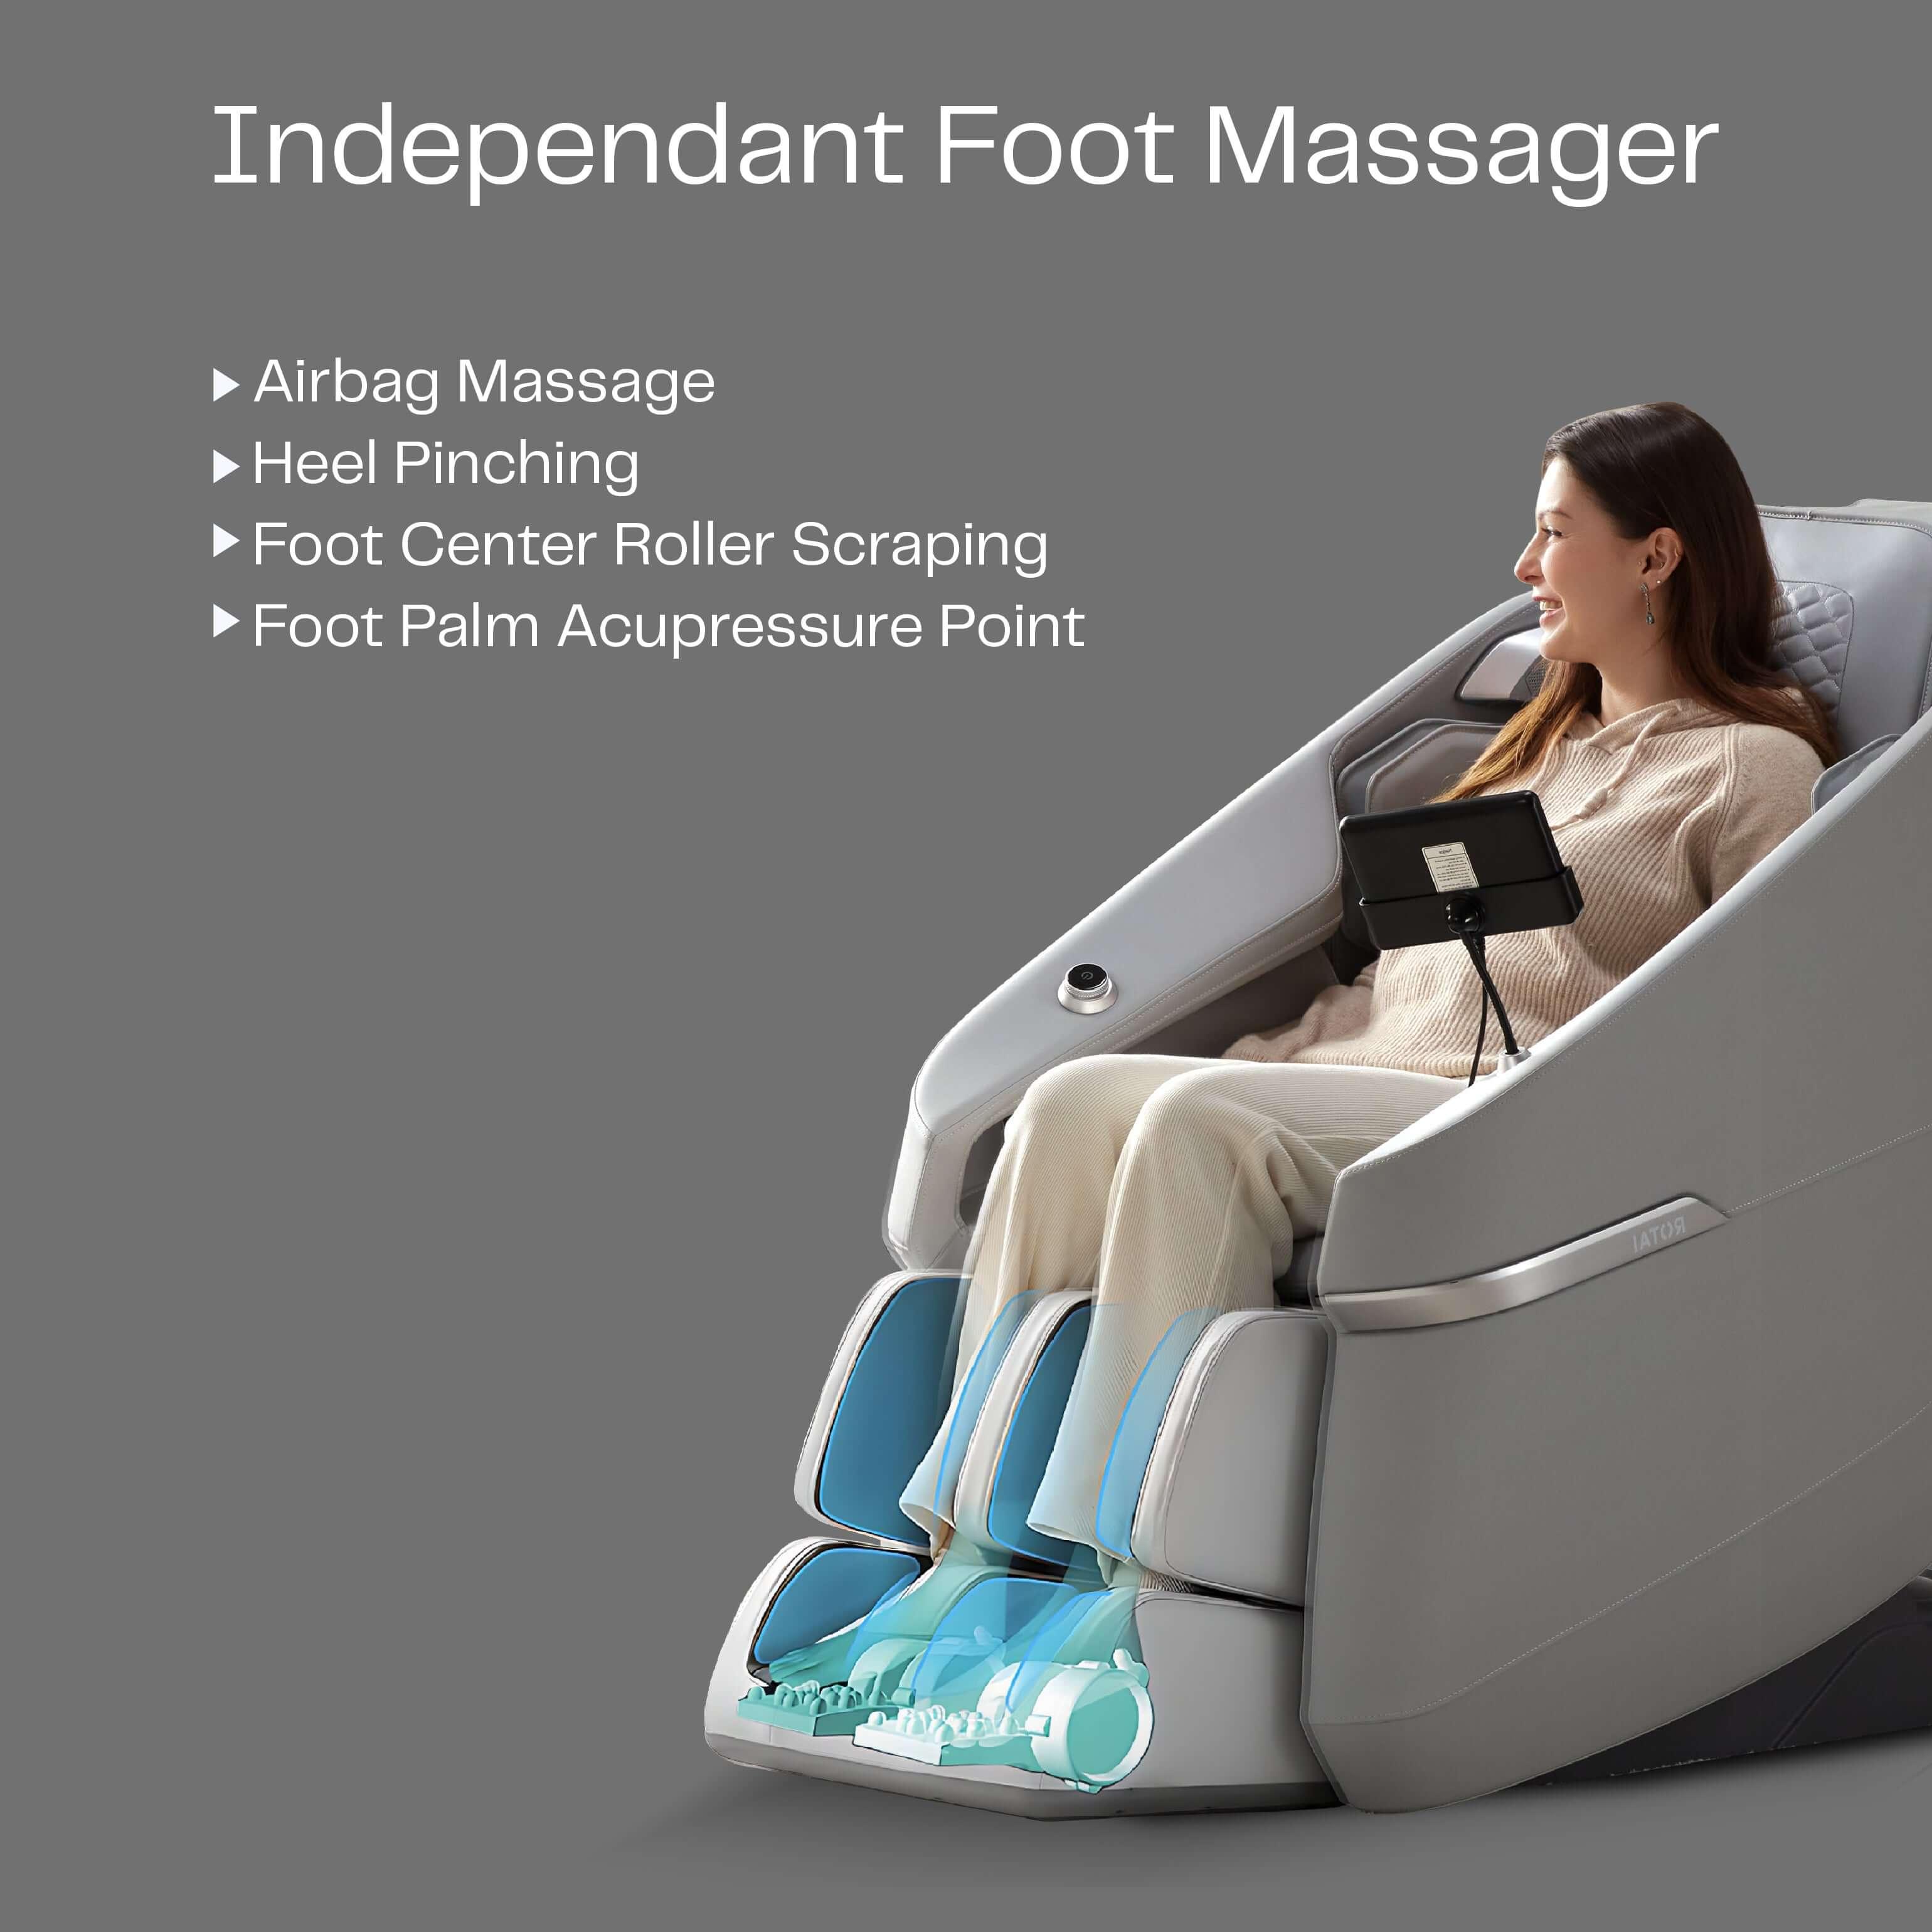 Woman using Ekanite Massage Chair with foot massager feature, tablet control, and airbag massage. Best Massage Chair in UAE, Dubai. كرسي مساج كهربائي